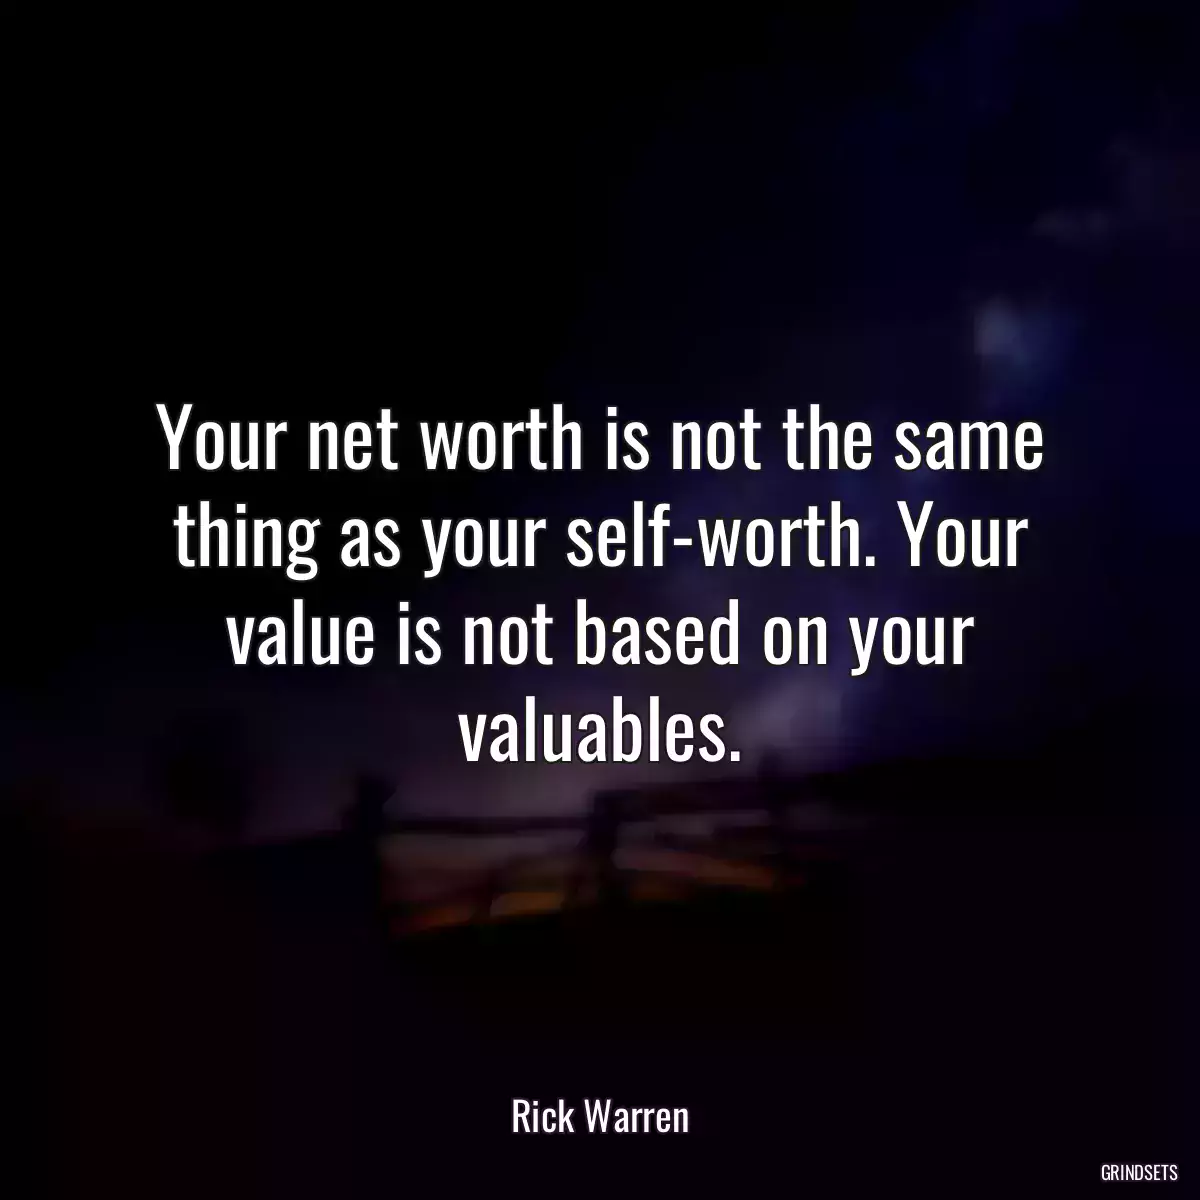 Your net worth is not the same thing as your self-worth. Your value is not based on your valuables.